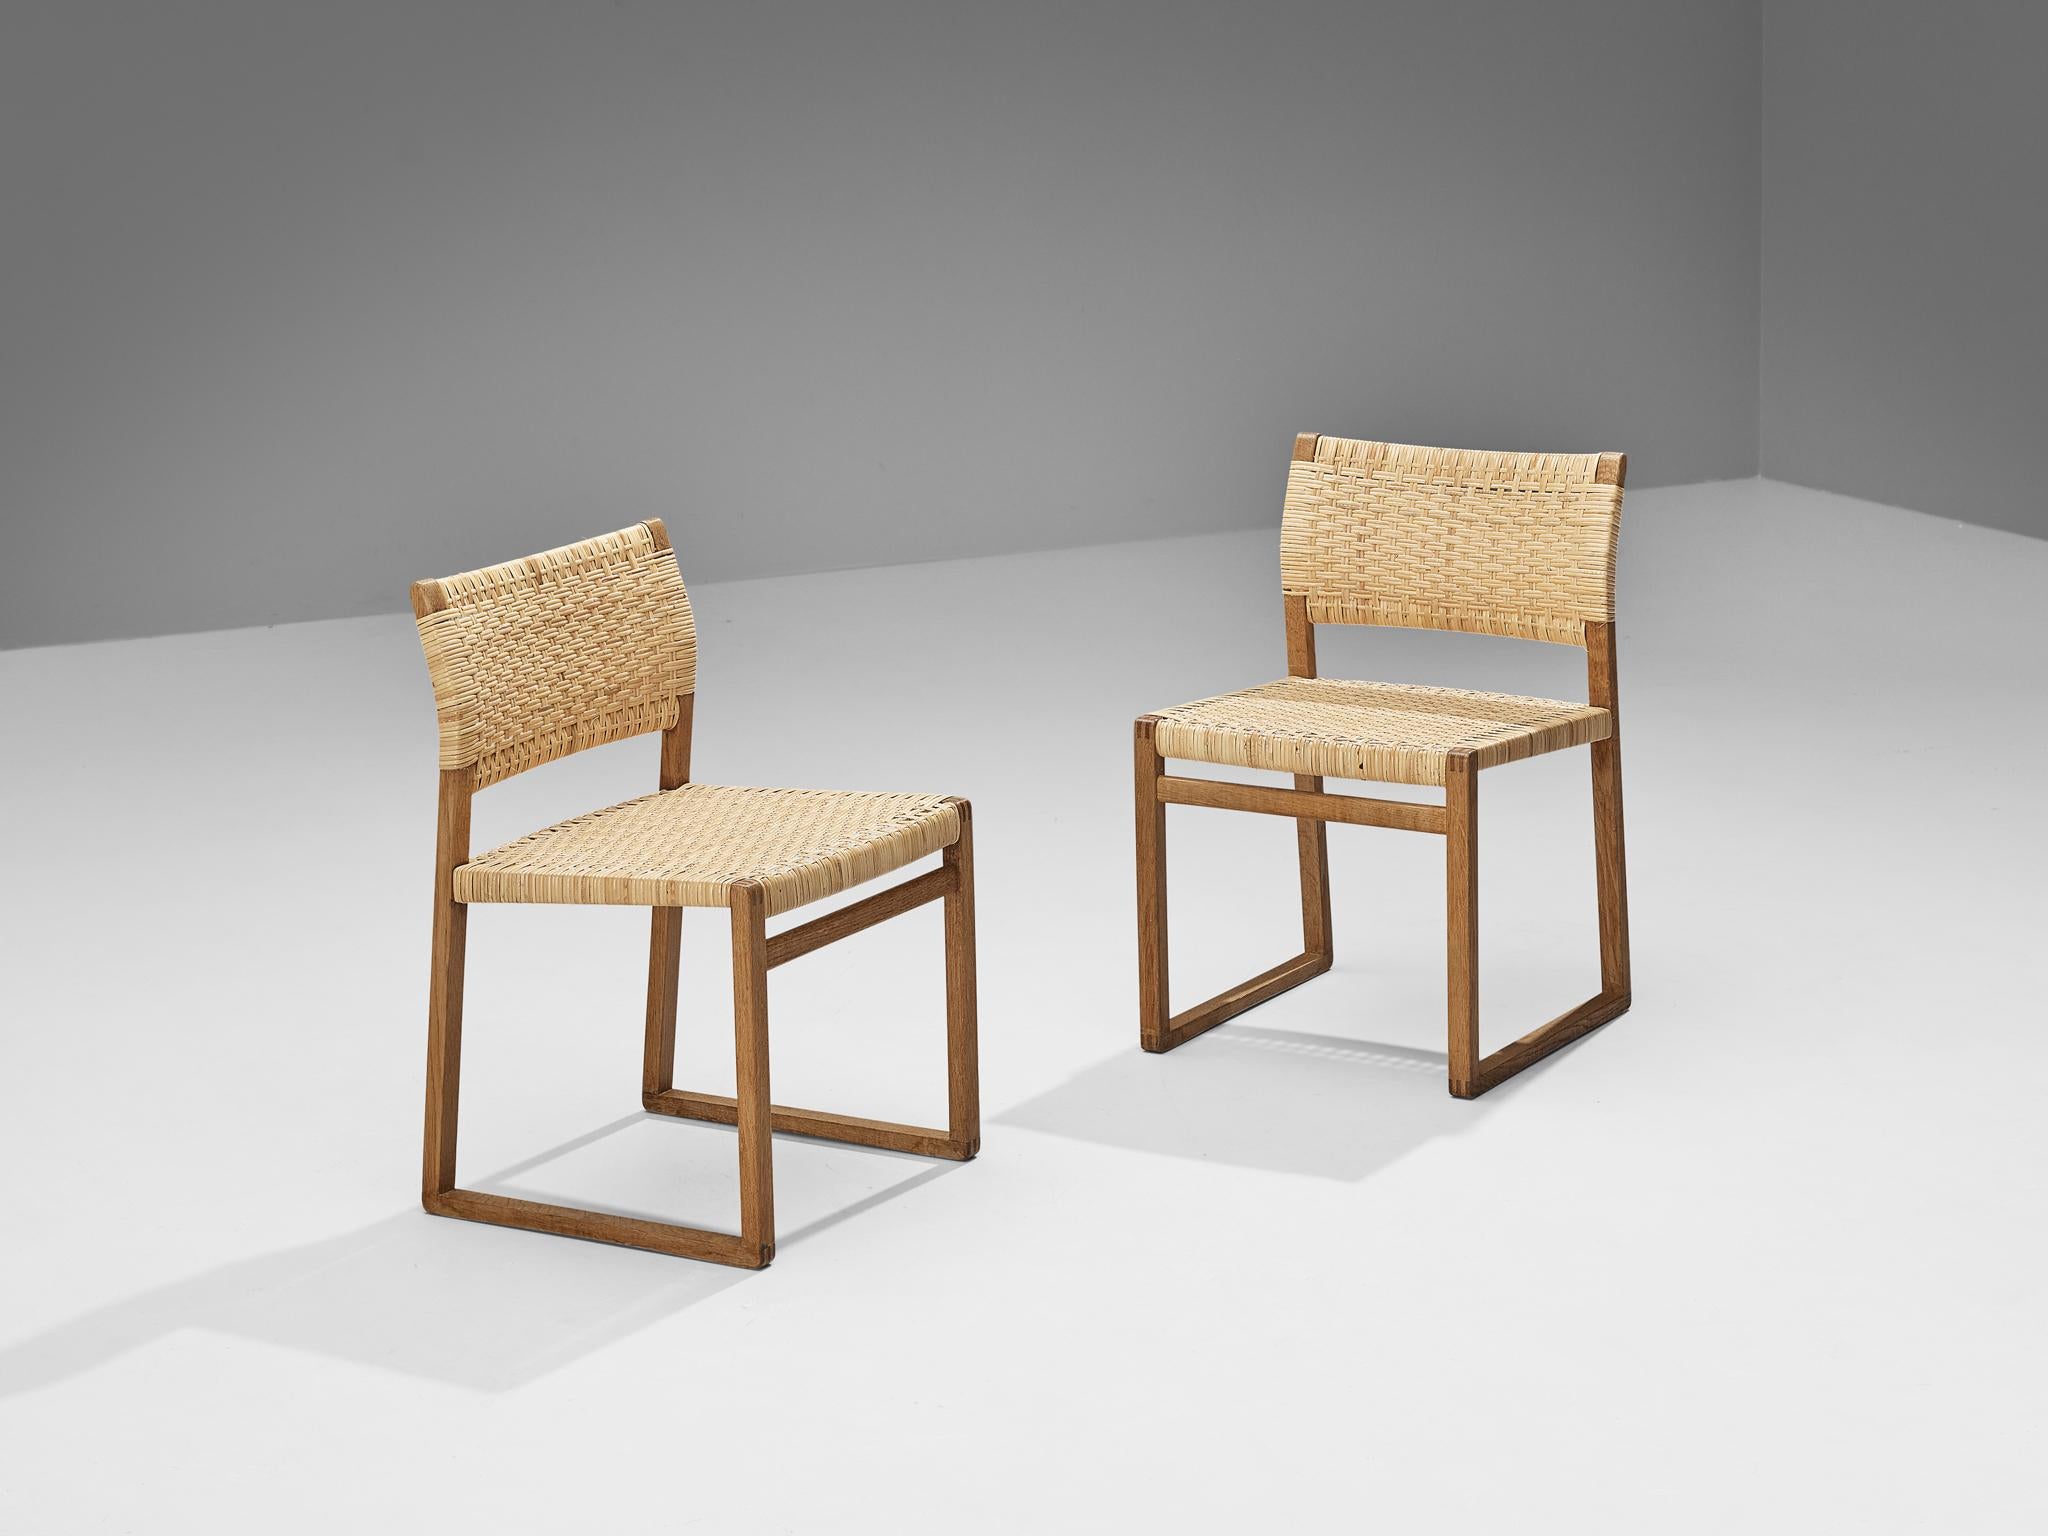 Børge Mogensen for Fredericia, dining chairs model ‘BM 61’, oak, cane wicker, Denmark, 1950s

This naturalistic looking chair is characterized by a splendid design featuring simple shapes and authentic materials. The frame is composed of slender